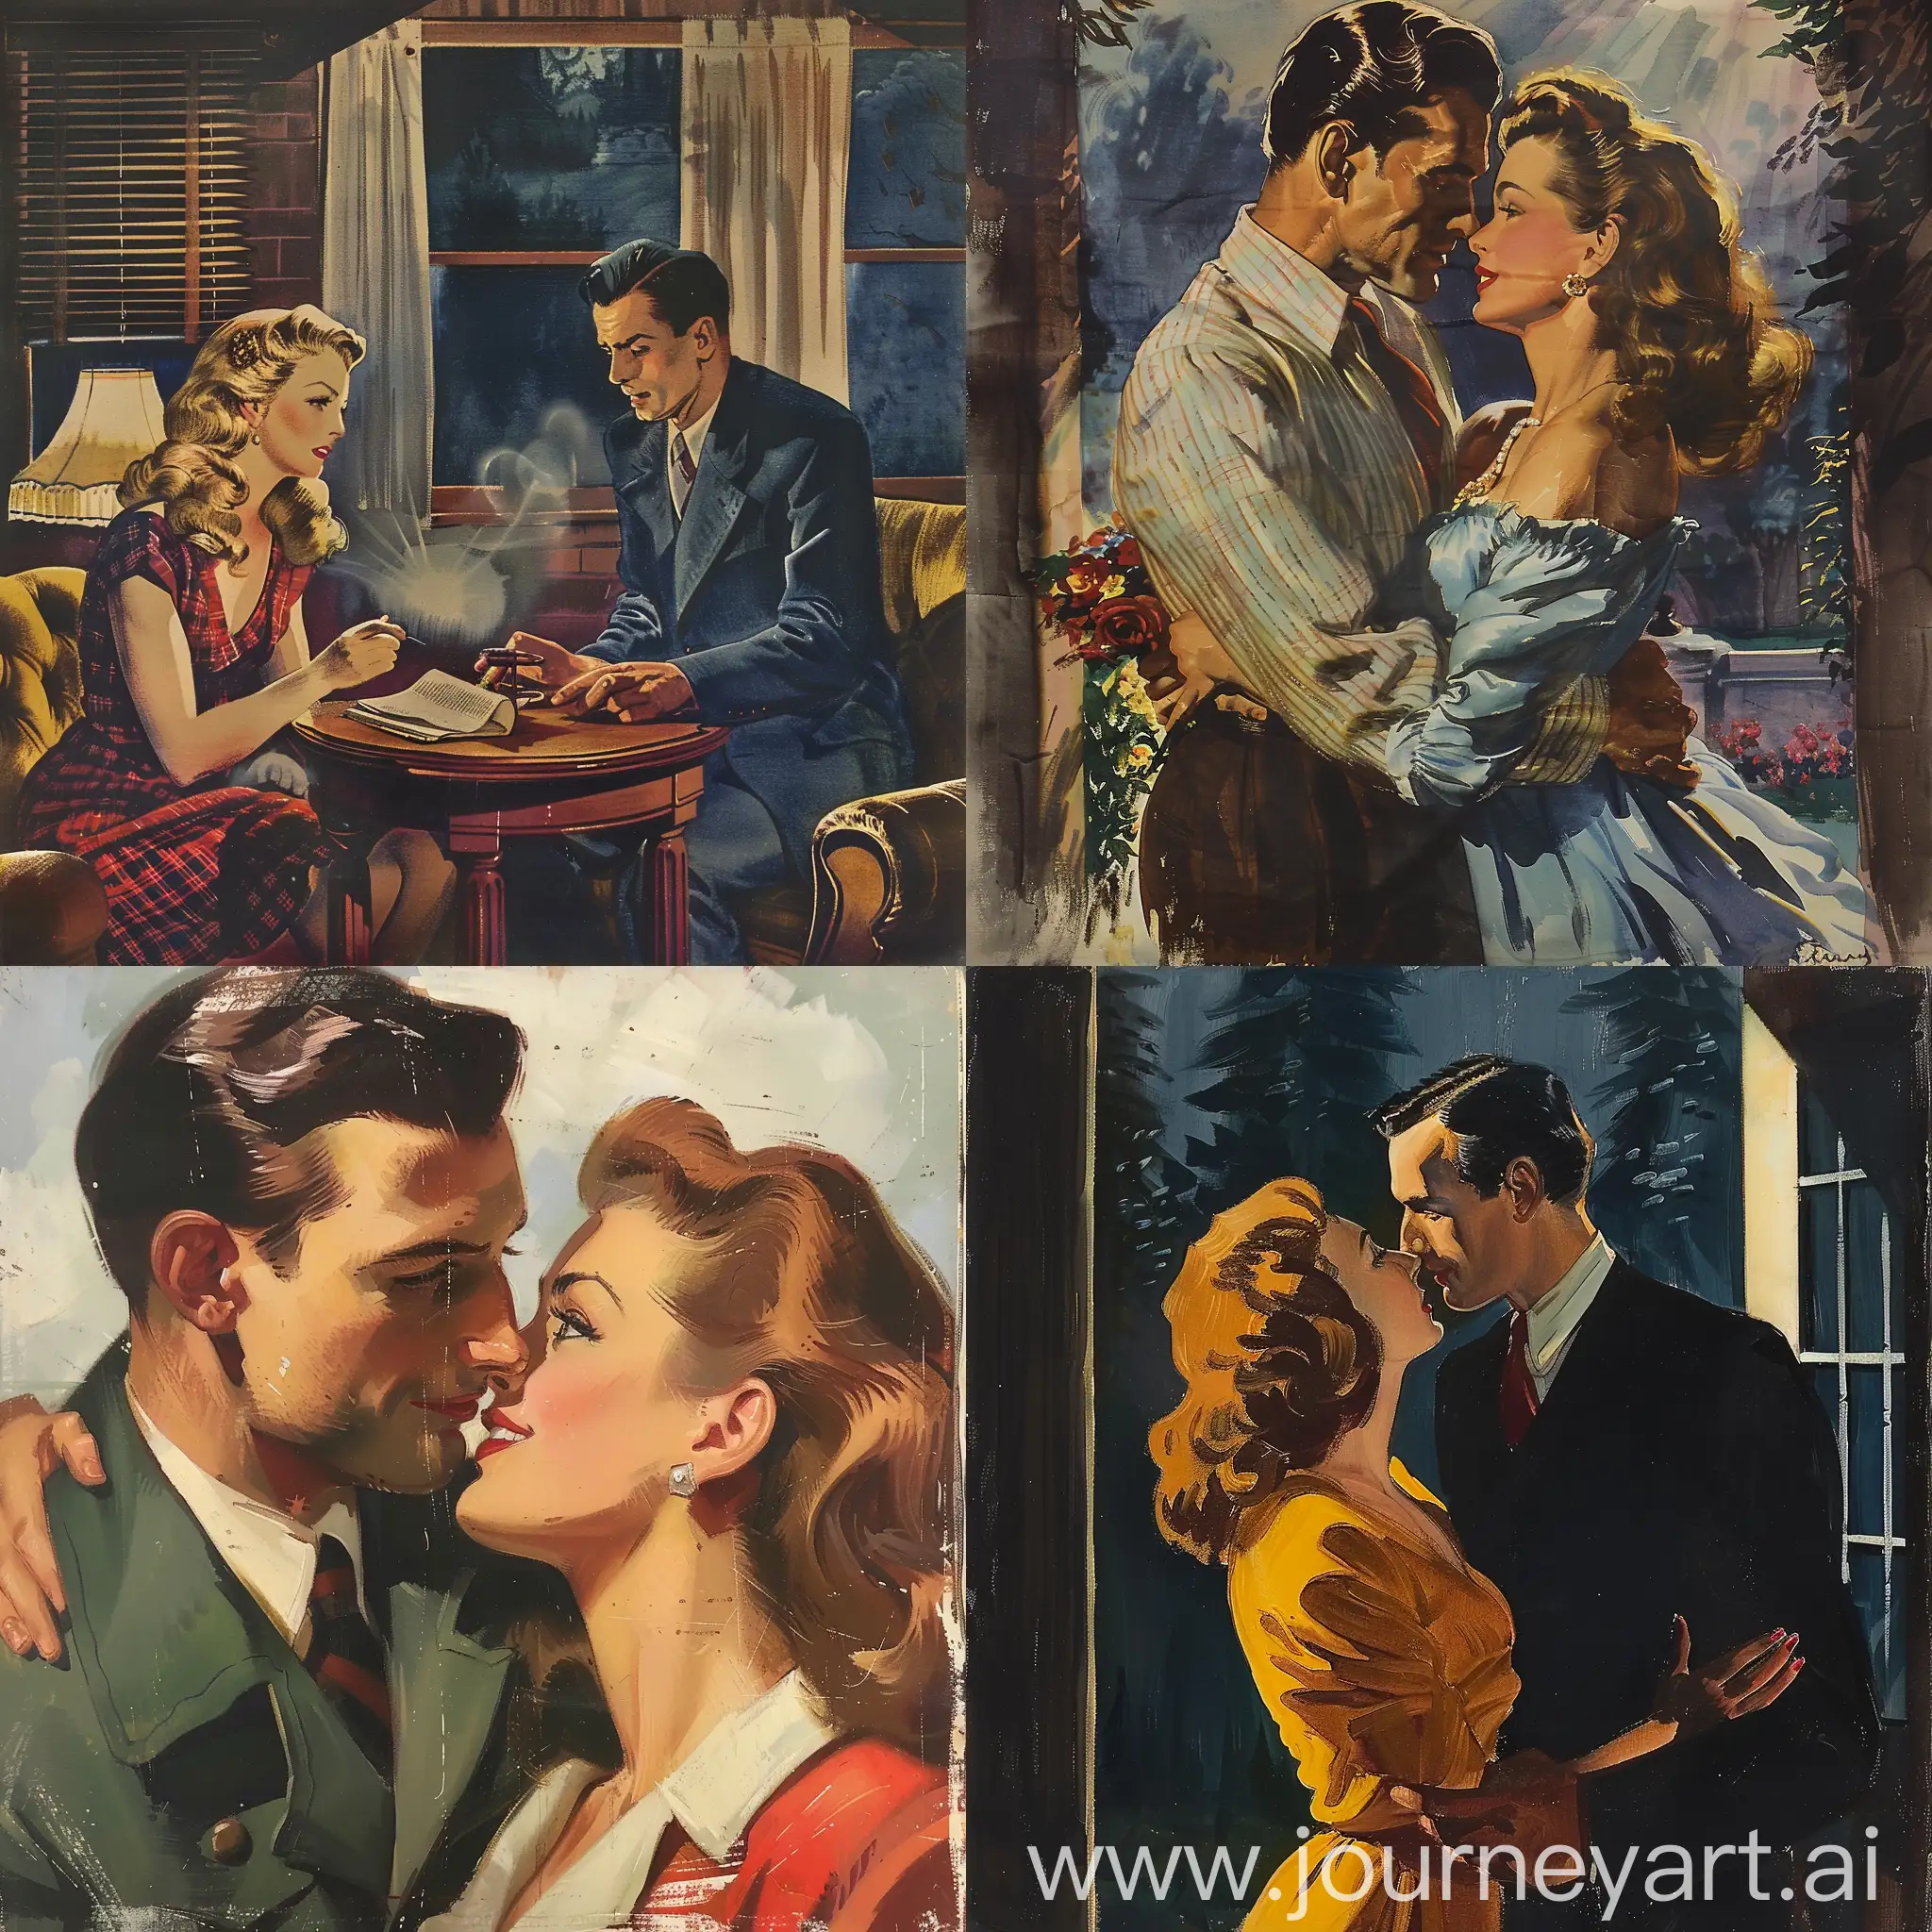 1940s-Romance-Pulp-Art-Vintage-Love-in-a-Classic-Setting